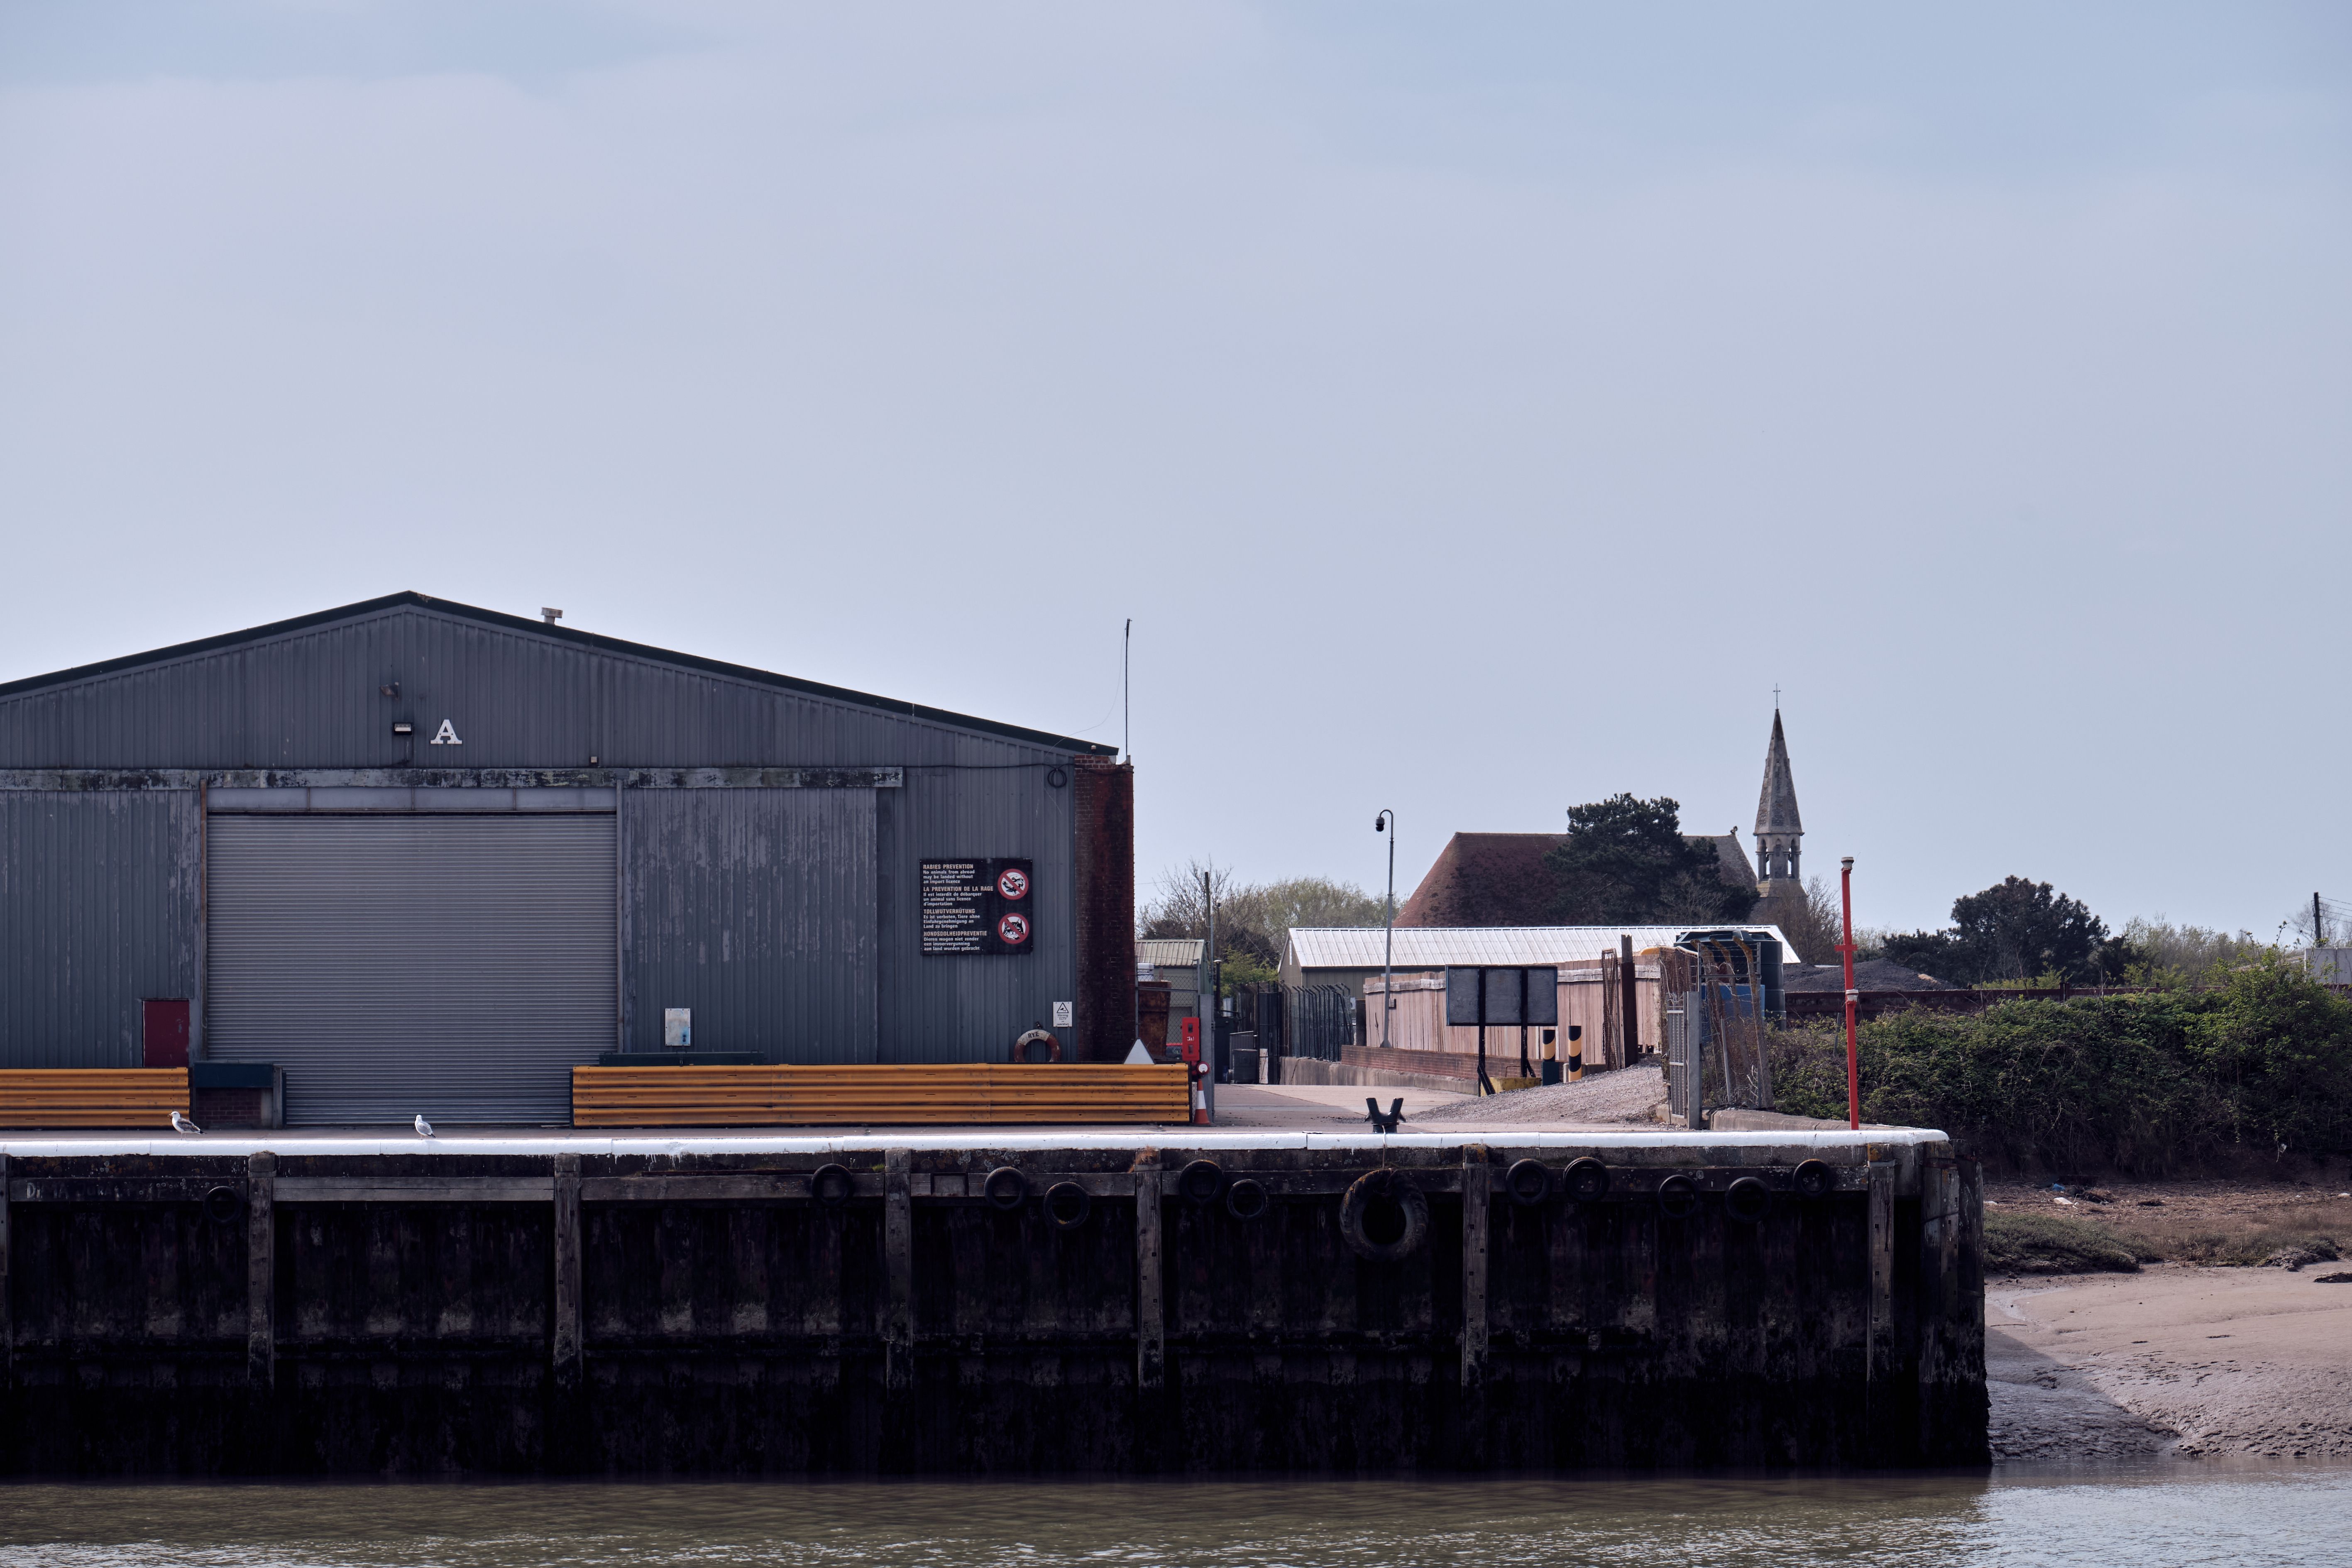 Factory buildings on a dock with a church spire in the background